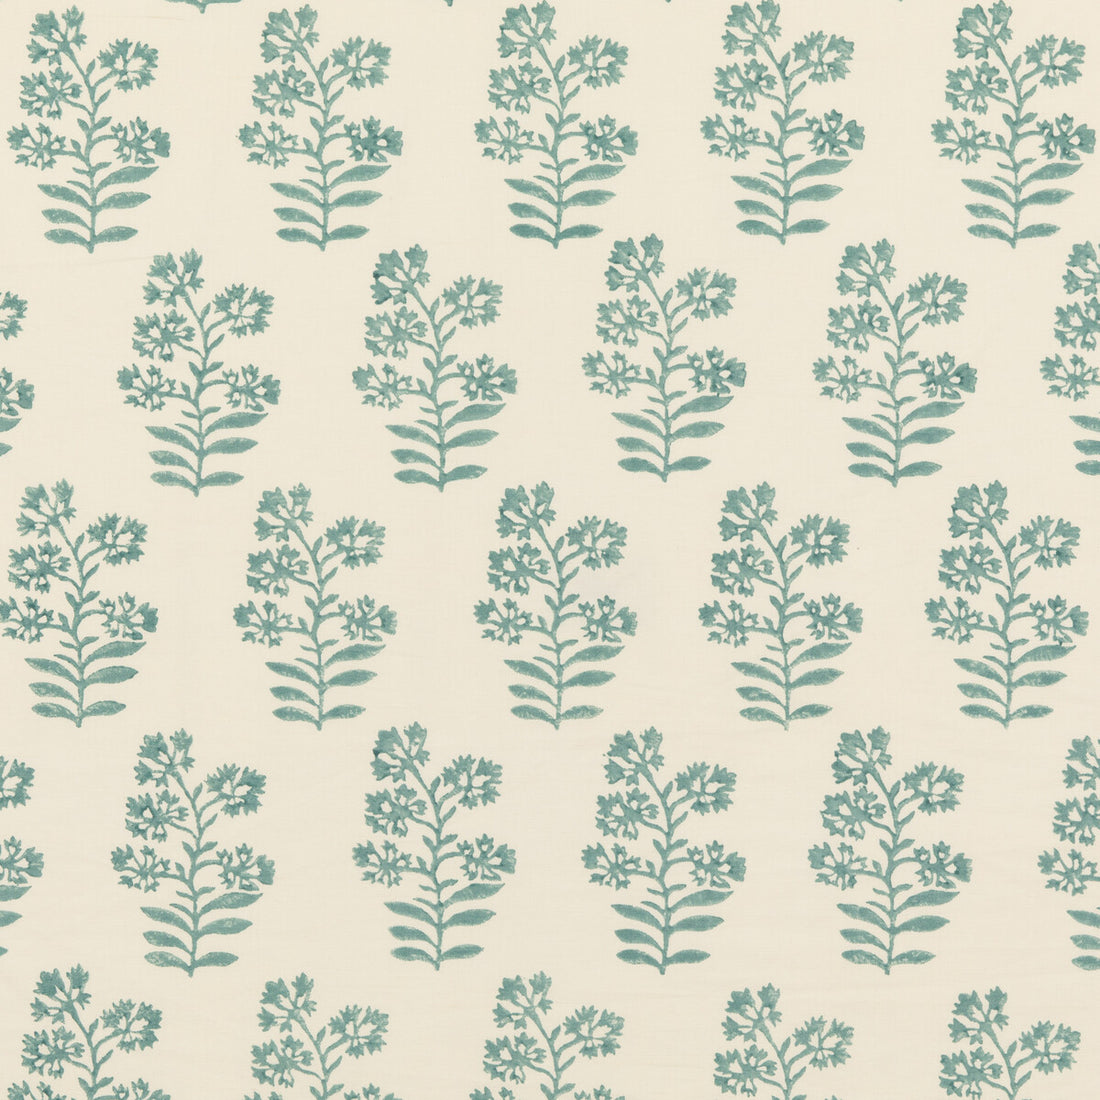 Wild Flower fabric in aqua color - pattern PP50483.3.0 - by Baker Lifestyle in the Block Party collection